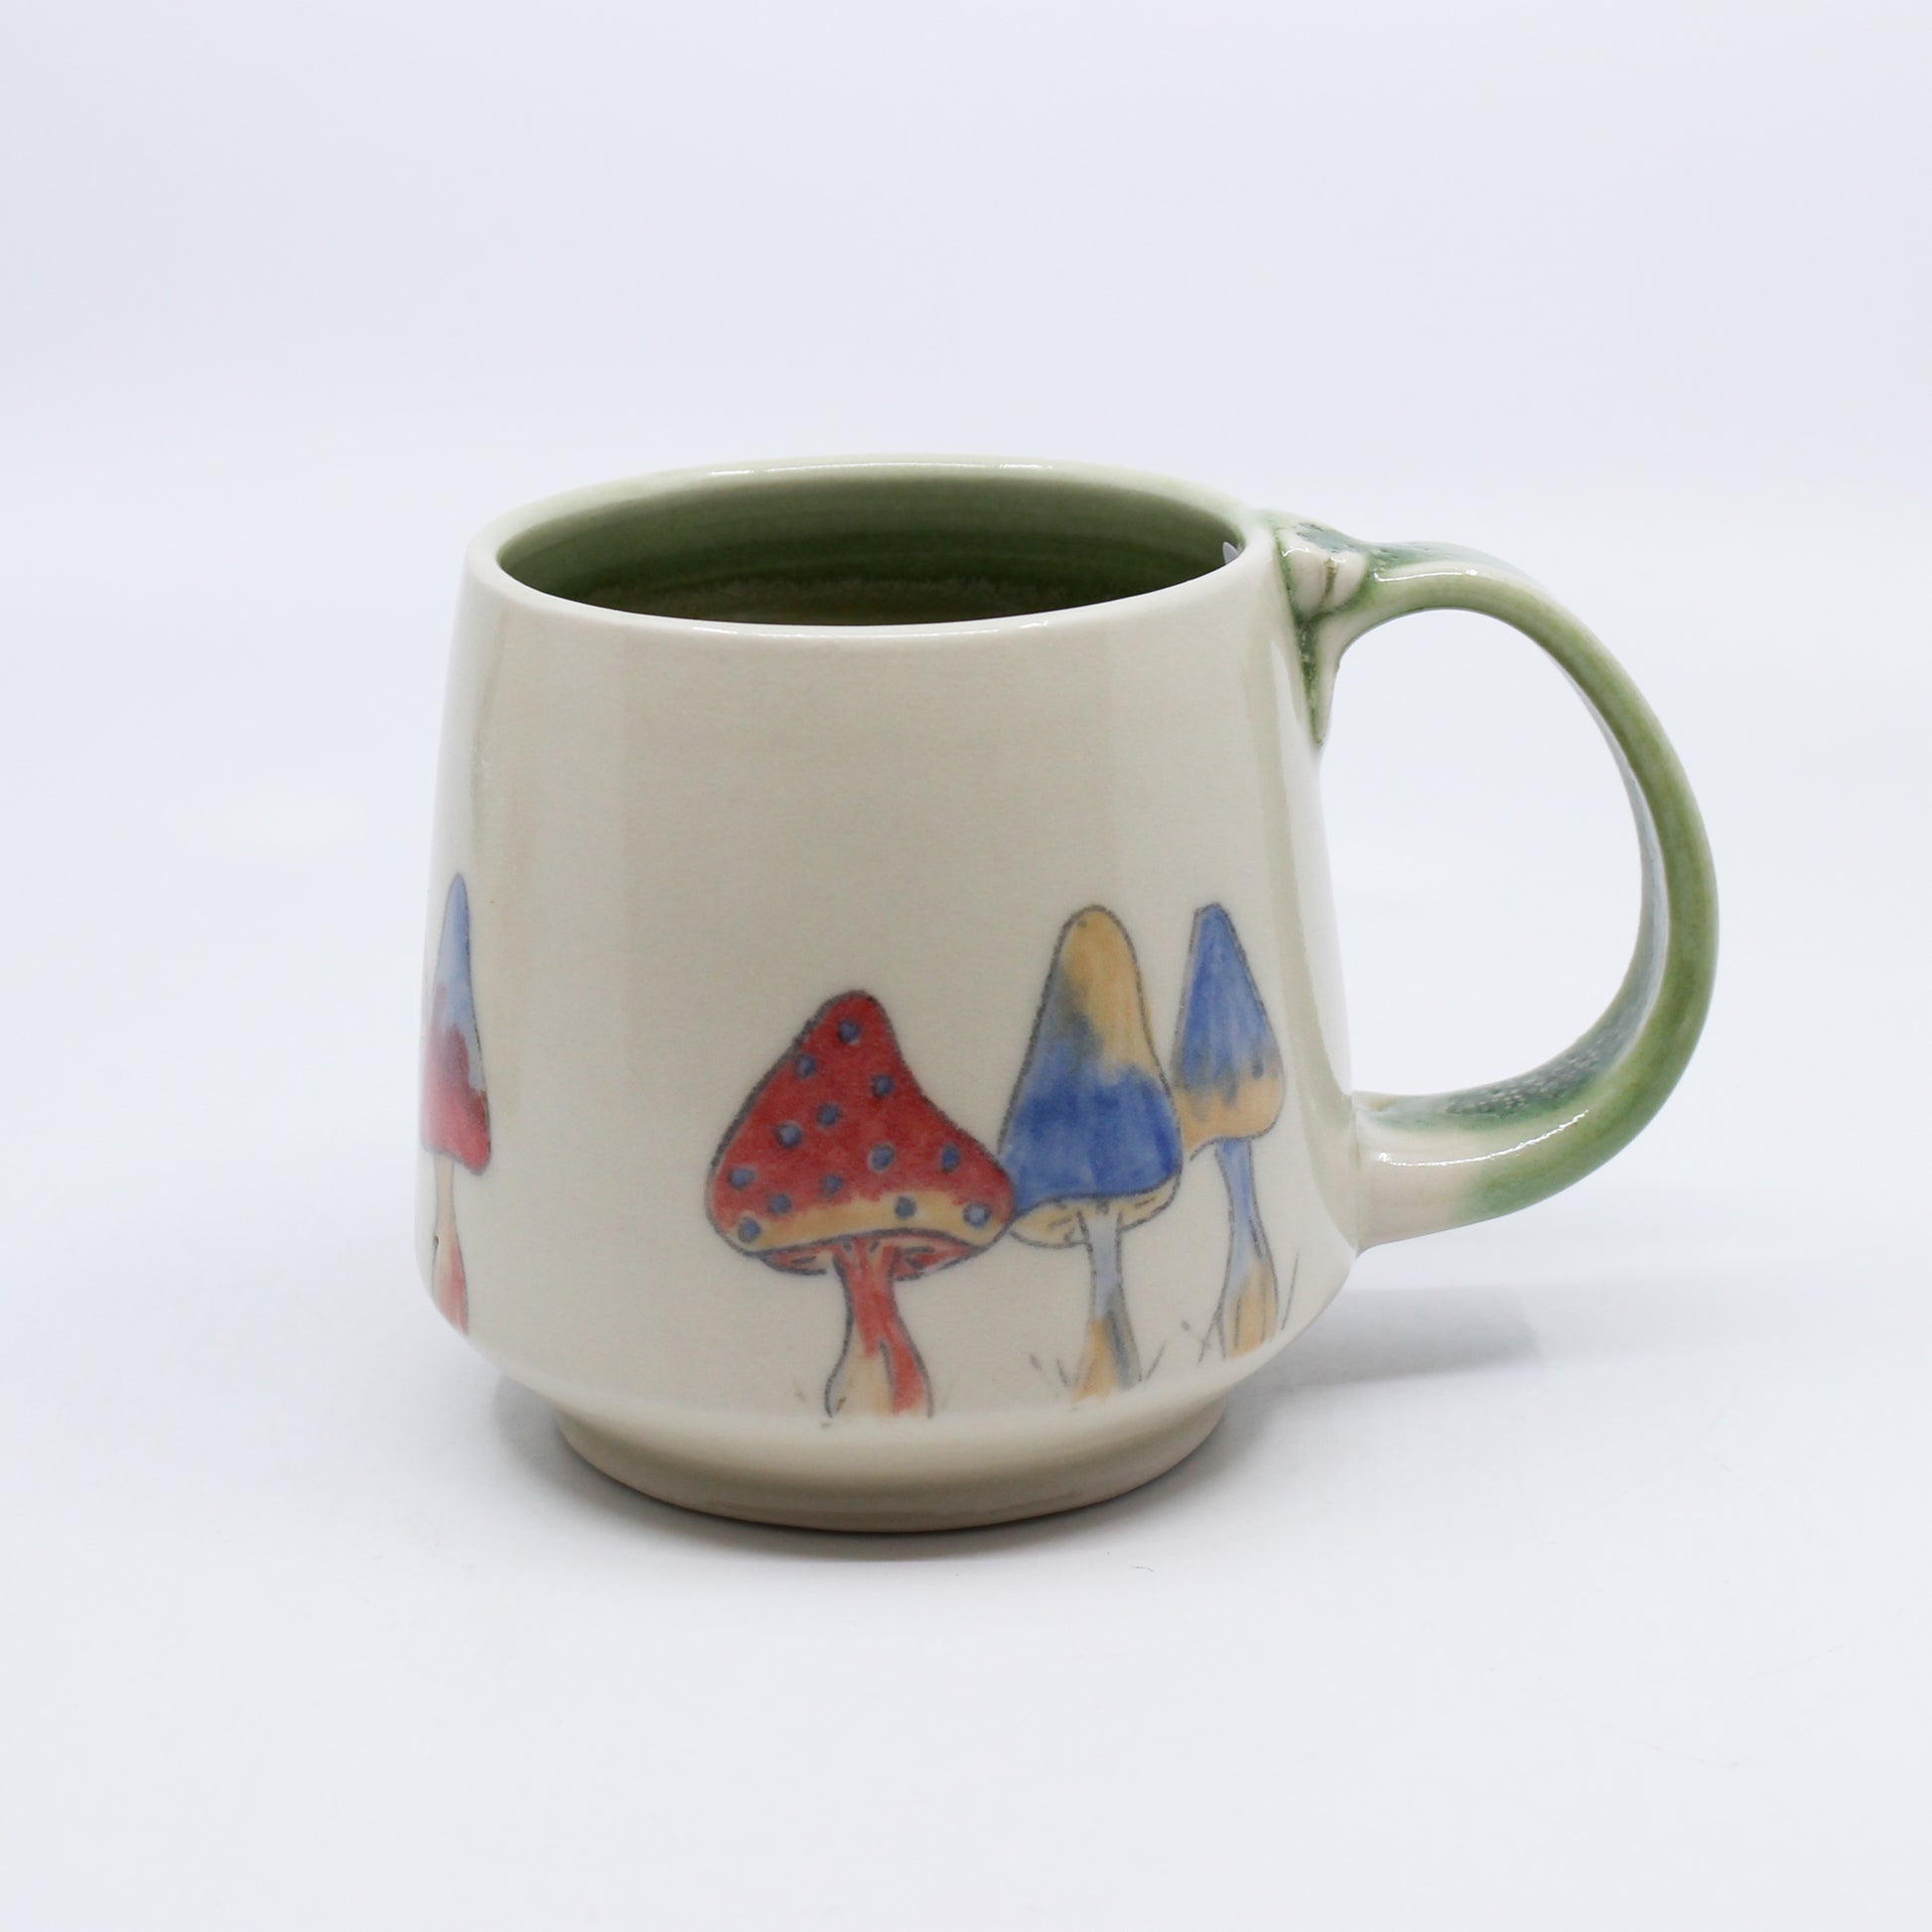 Mug with Red and blue mushrooms and green handle